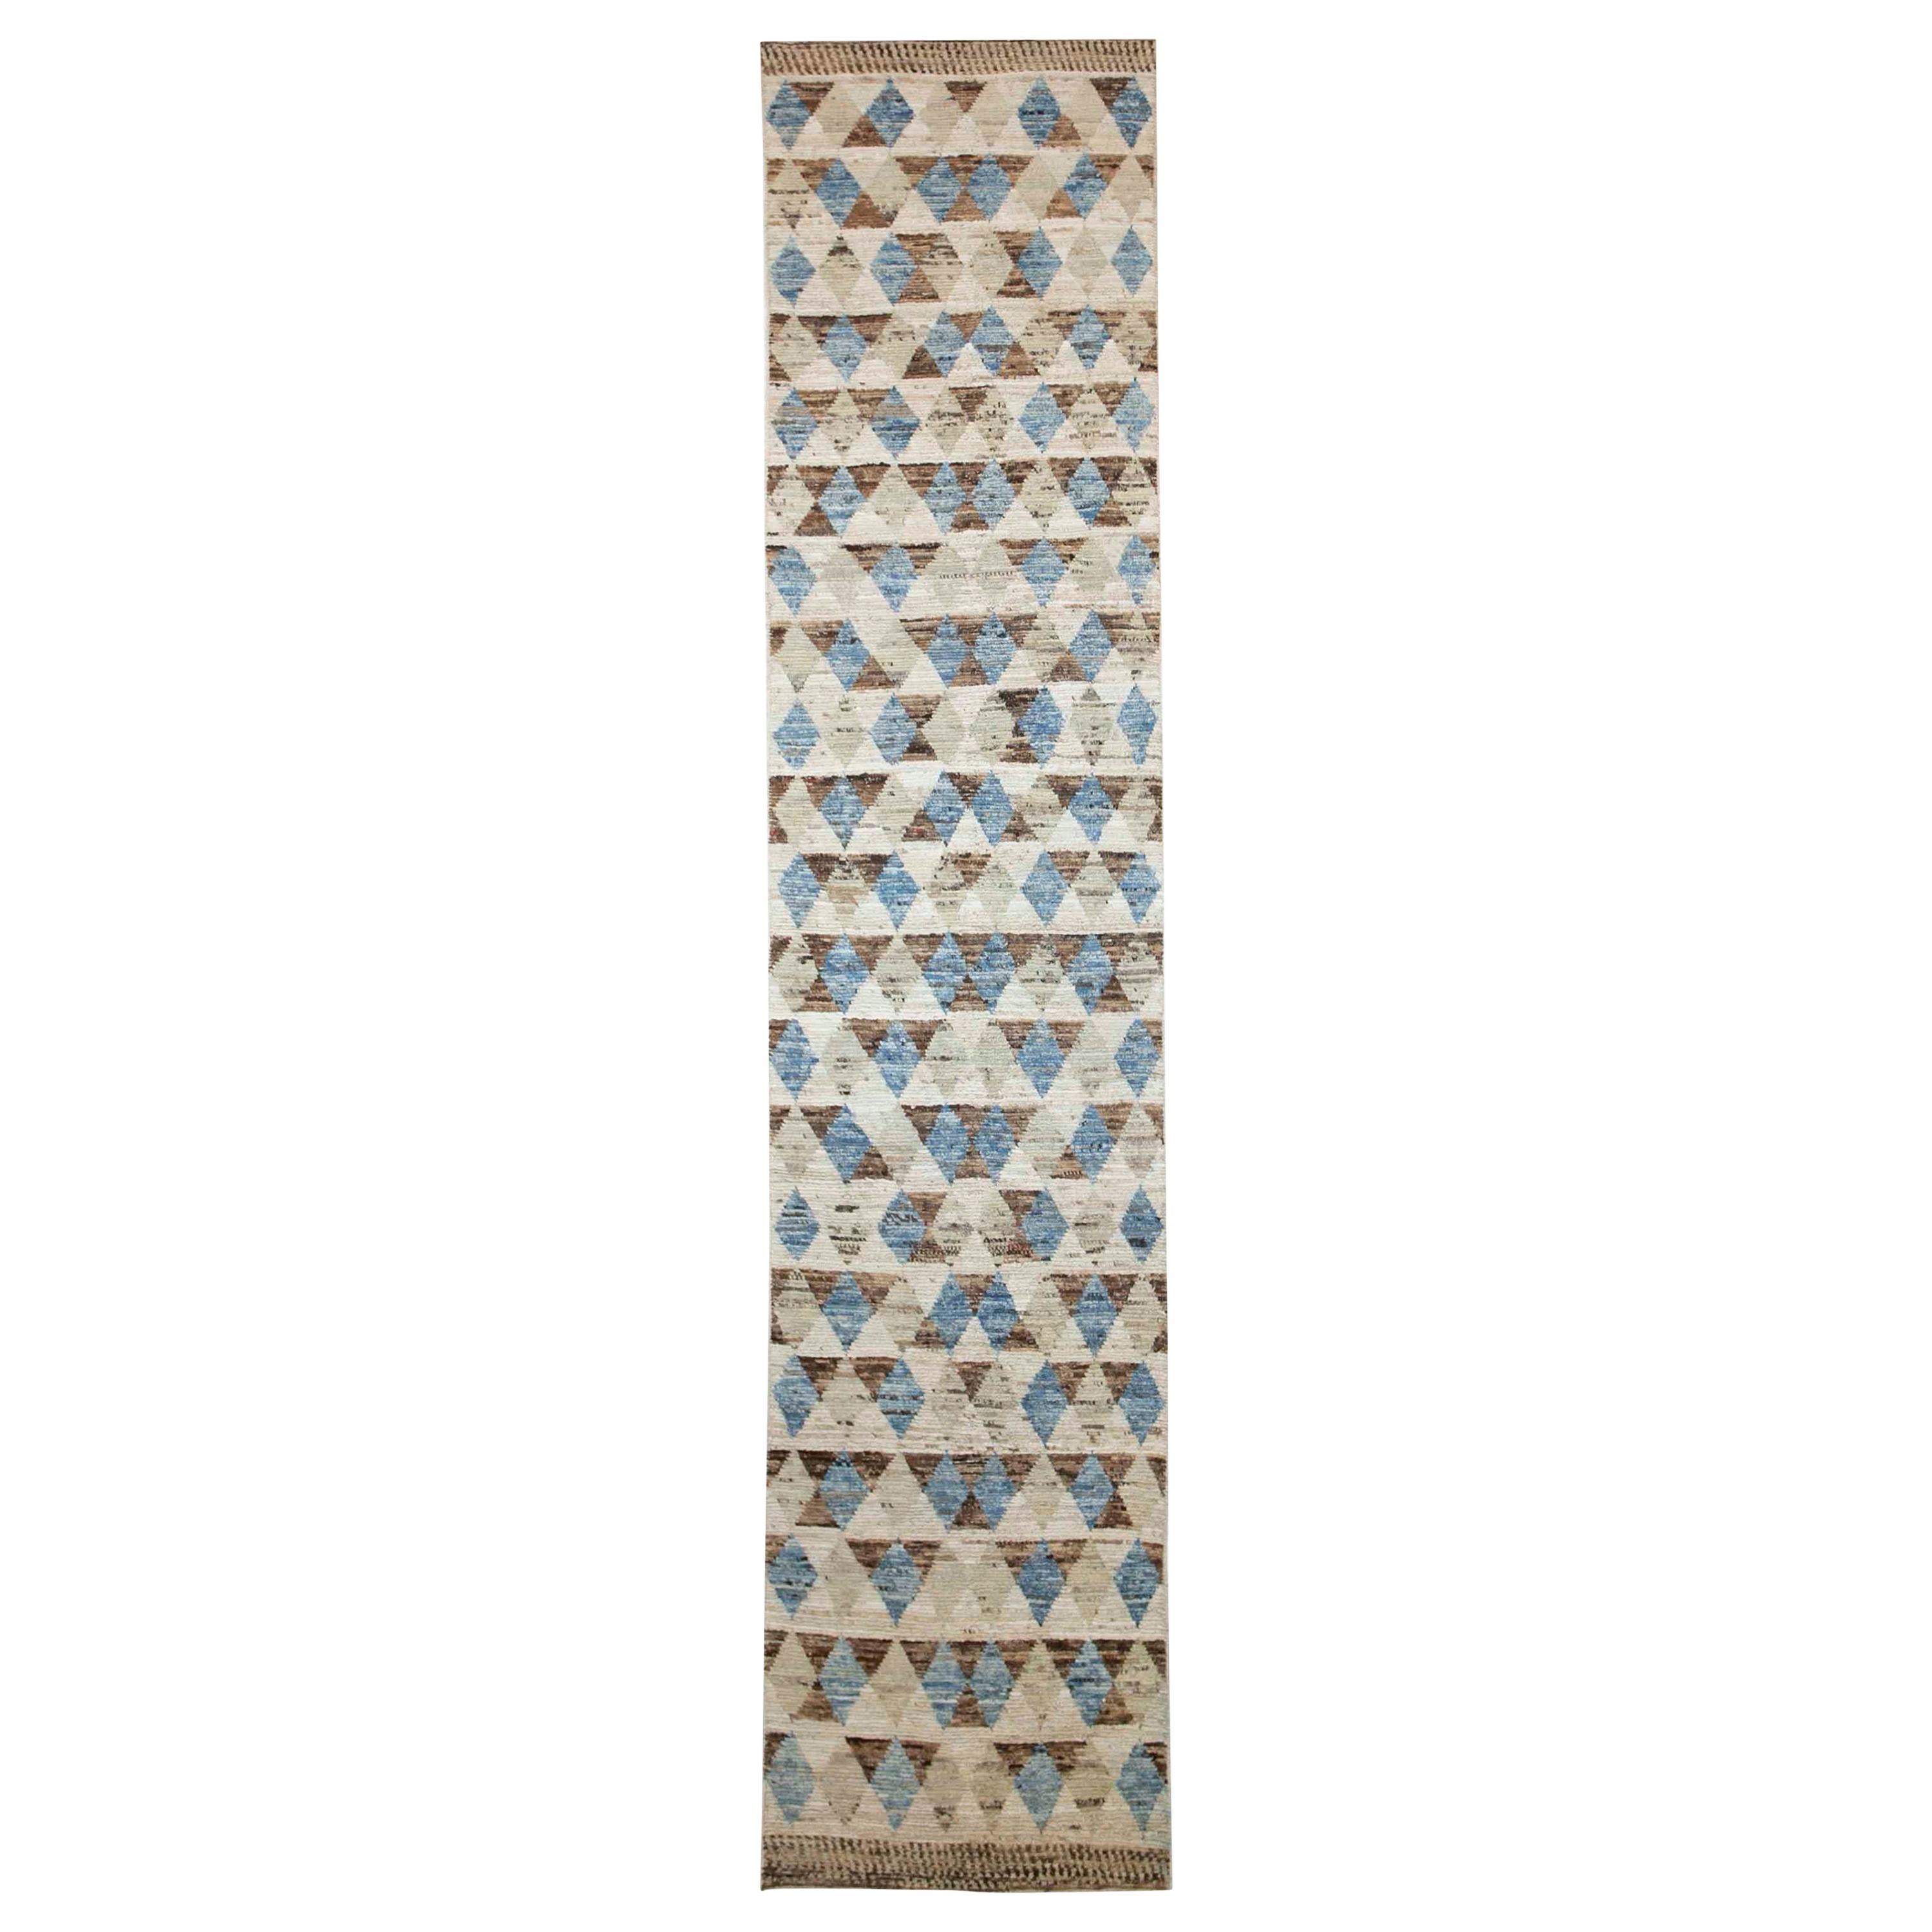 Afghan Moroccan Style Runner Rug with Brown & Blue Triangle Details